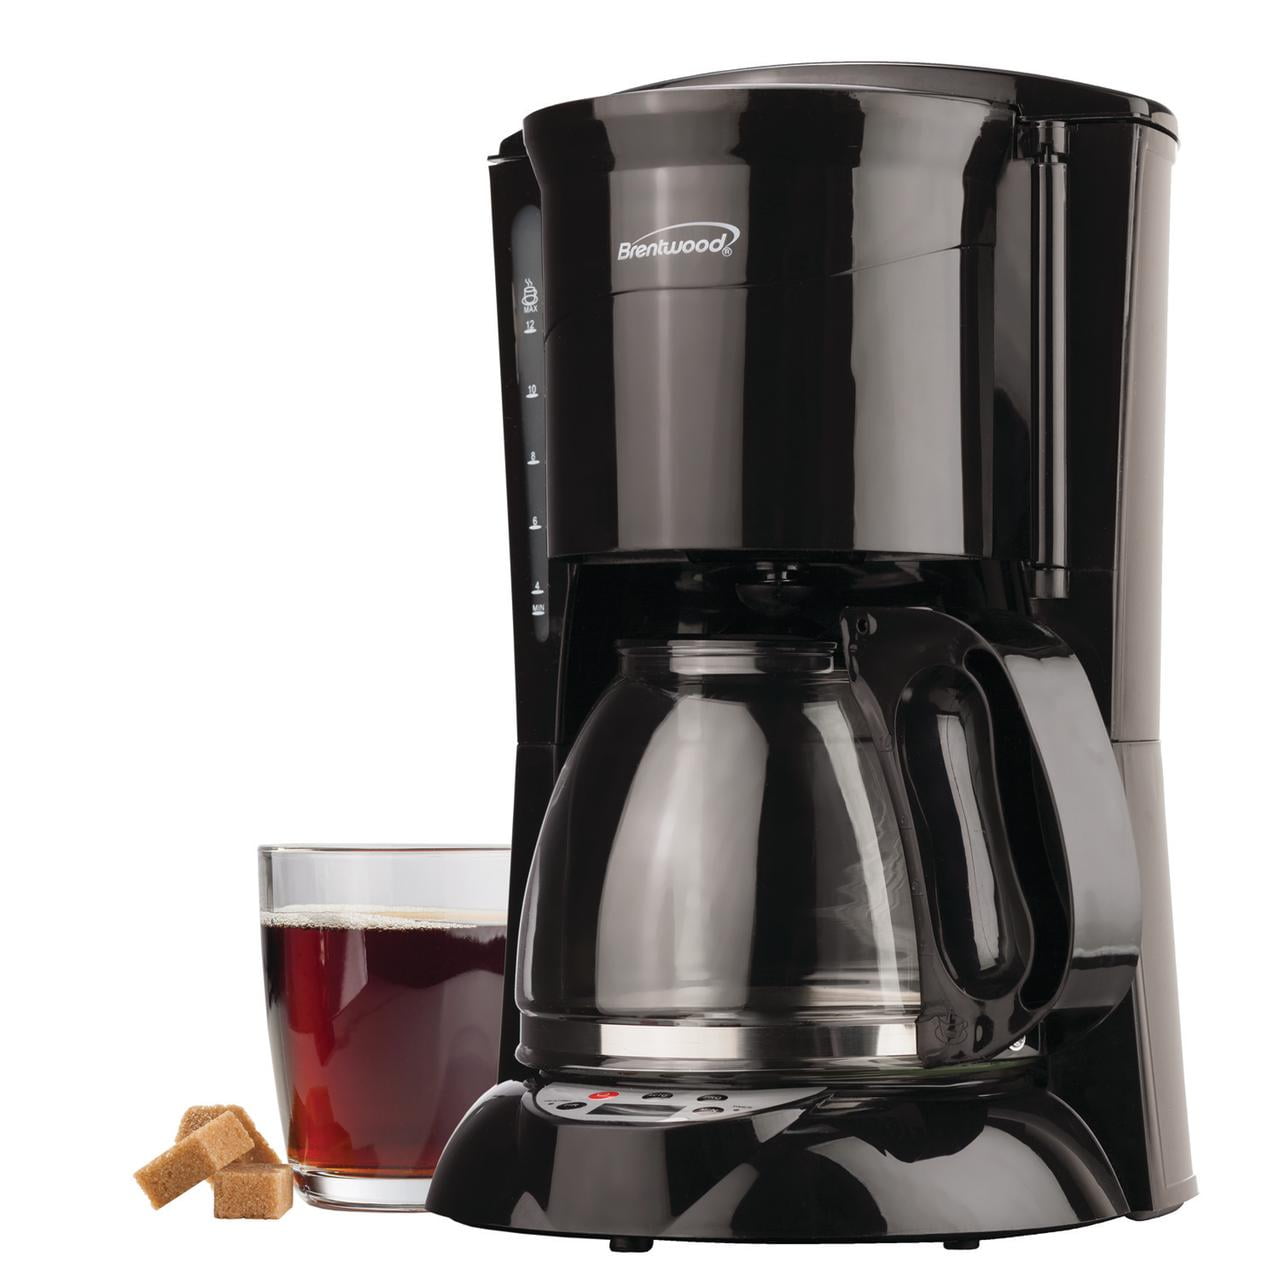 BRENTWOOD TS-217 12-Cup Coffee Maker 